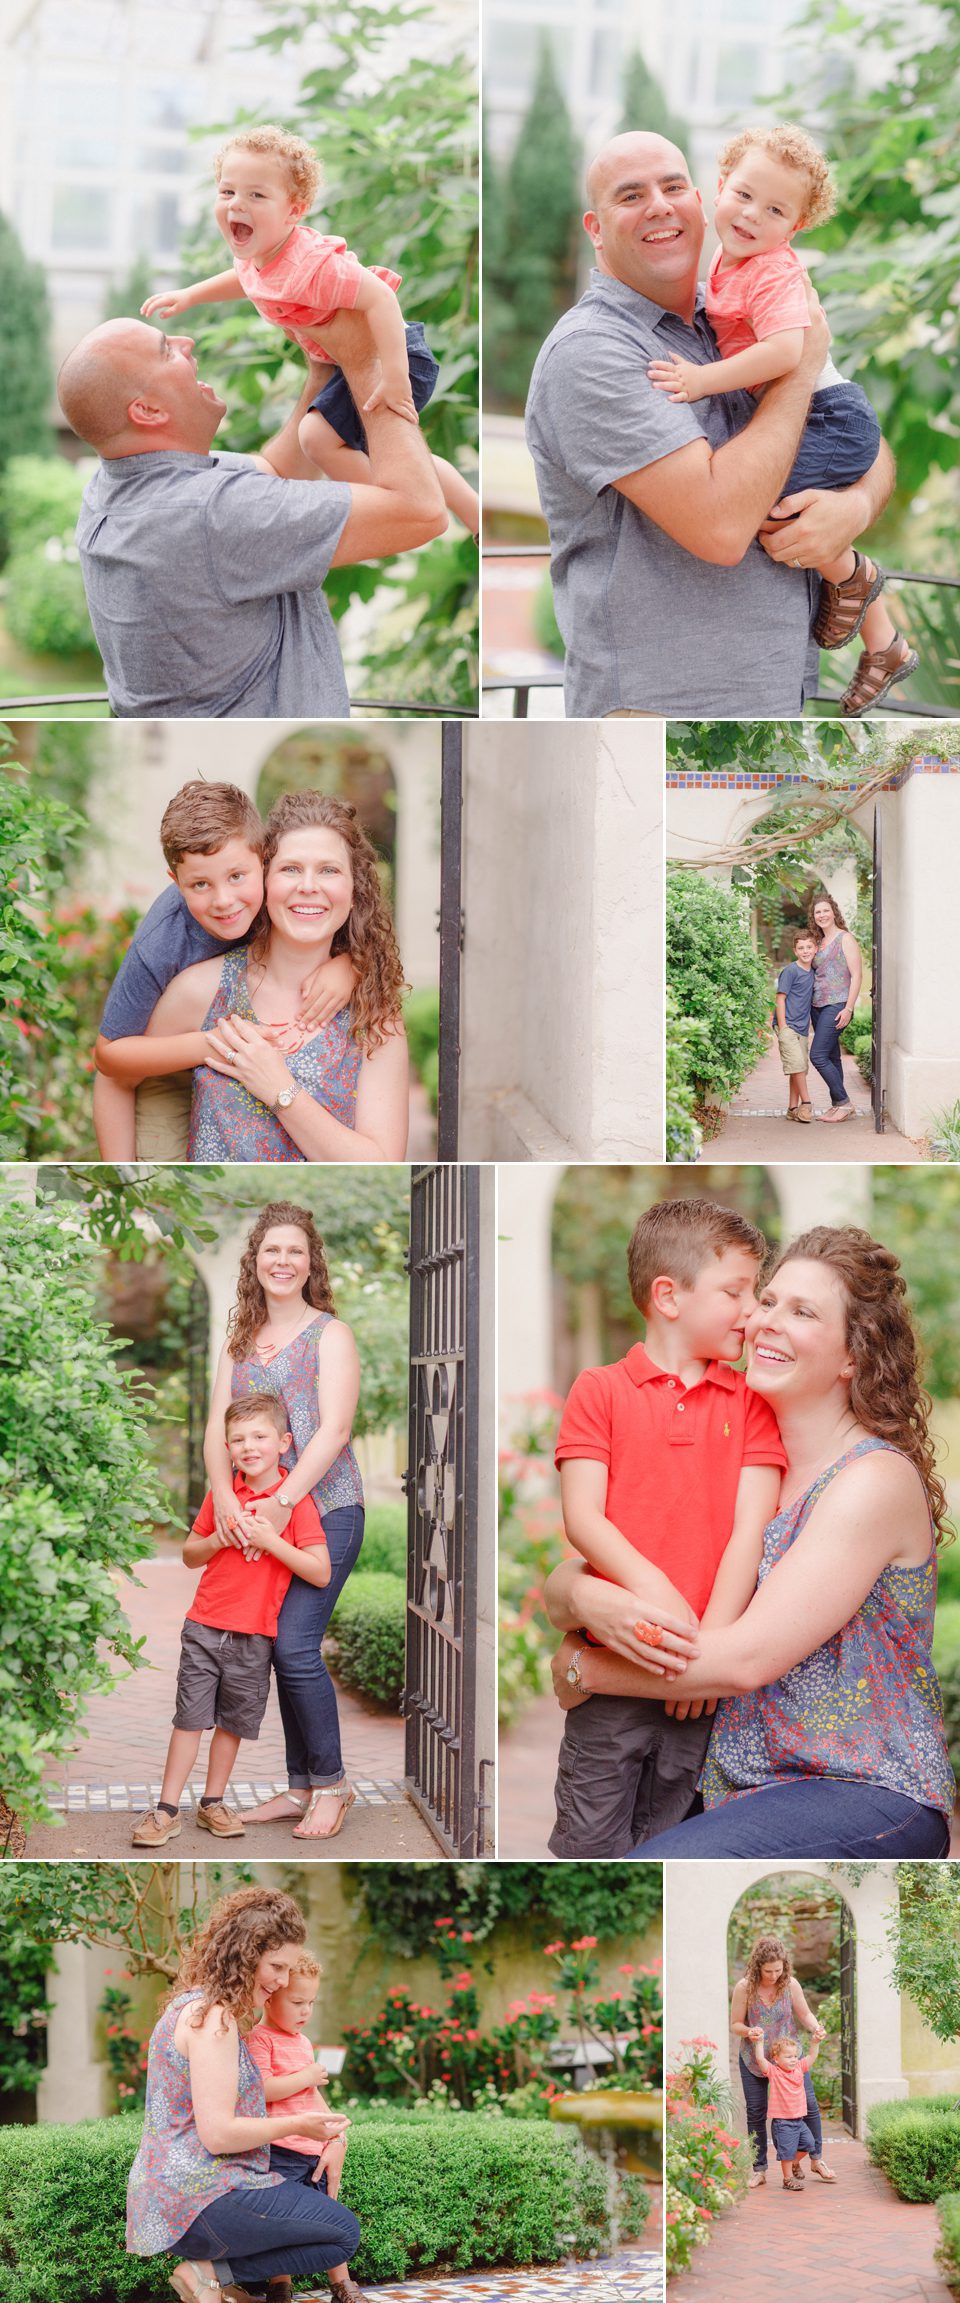 Lifestyle photography of a family in St. Louis at Botanical Gardens.